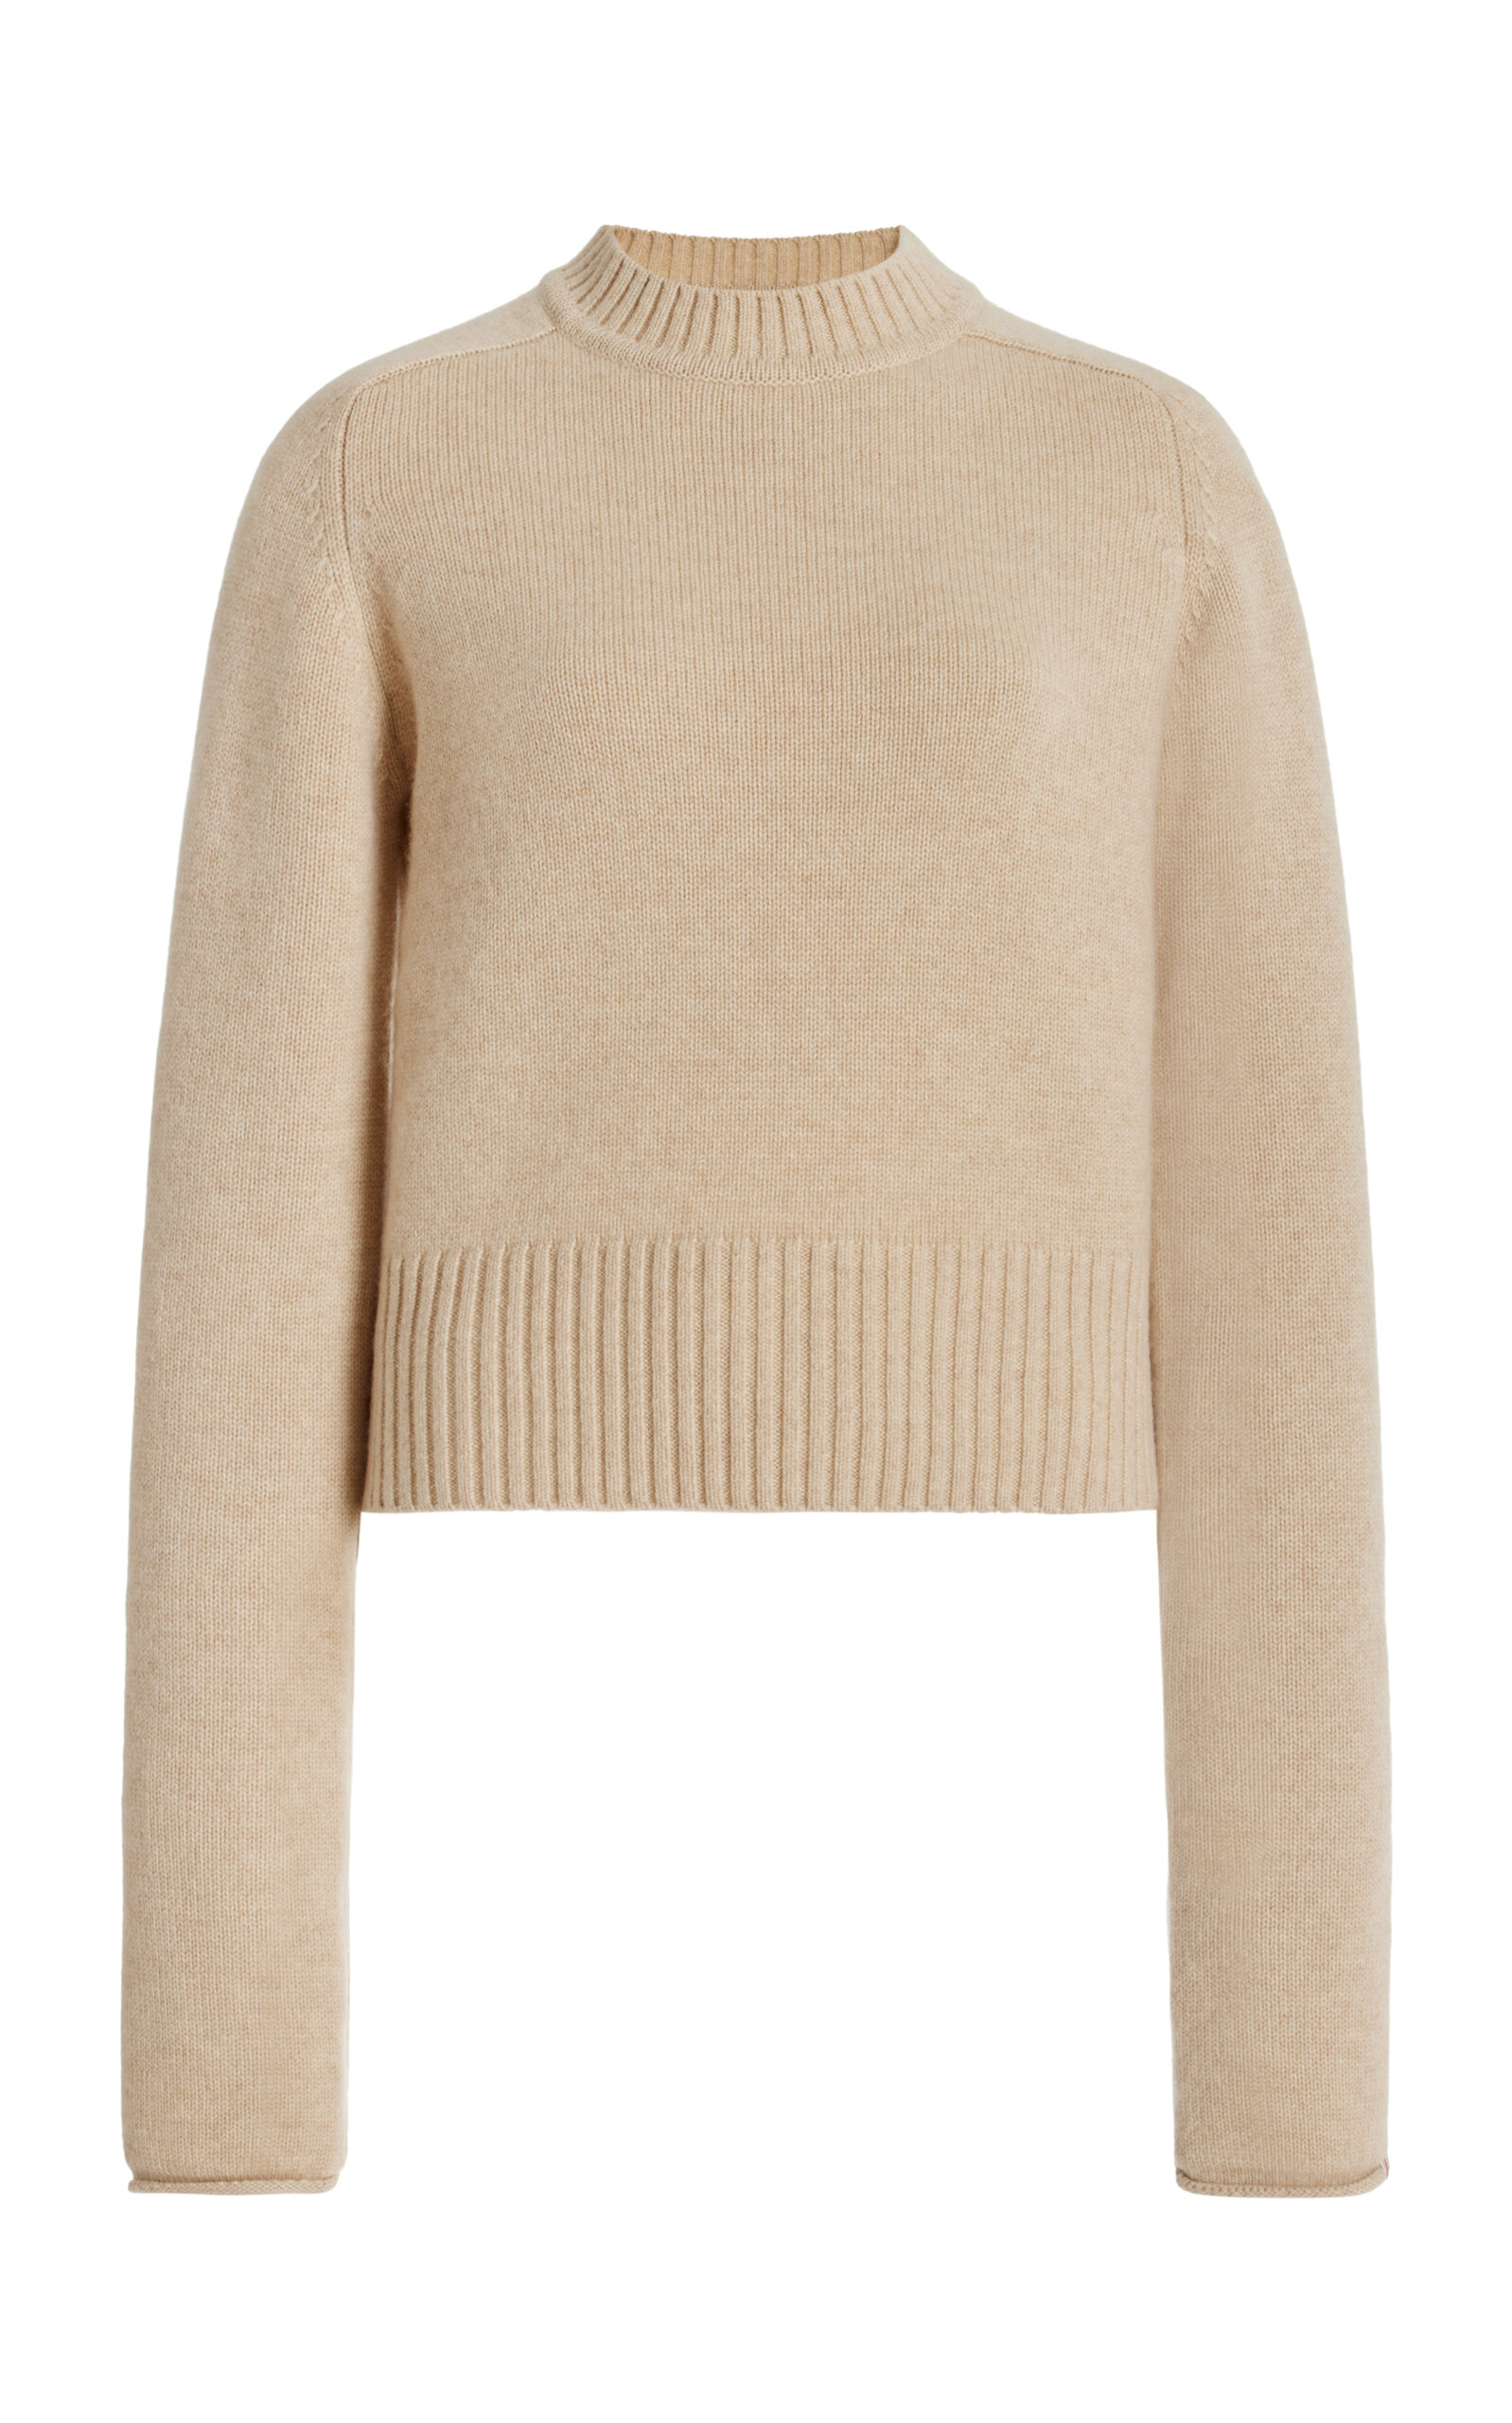 EXTREME CASHMERE CHERIE CASHMERE SWEATER